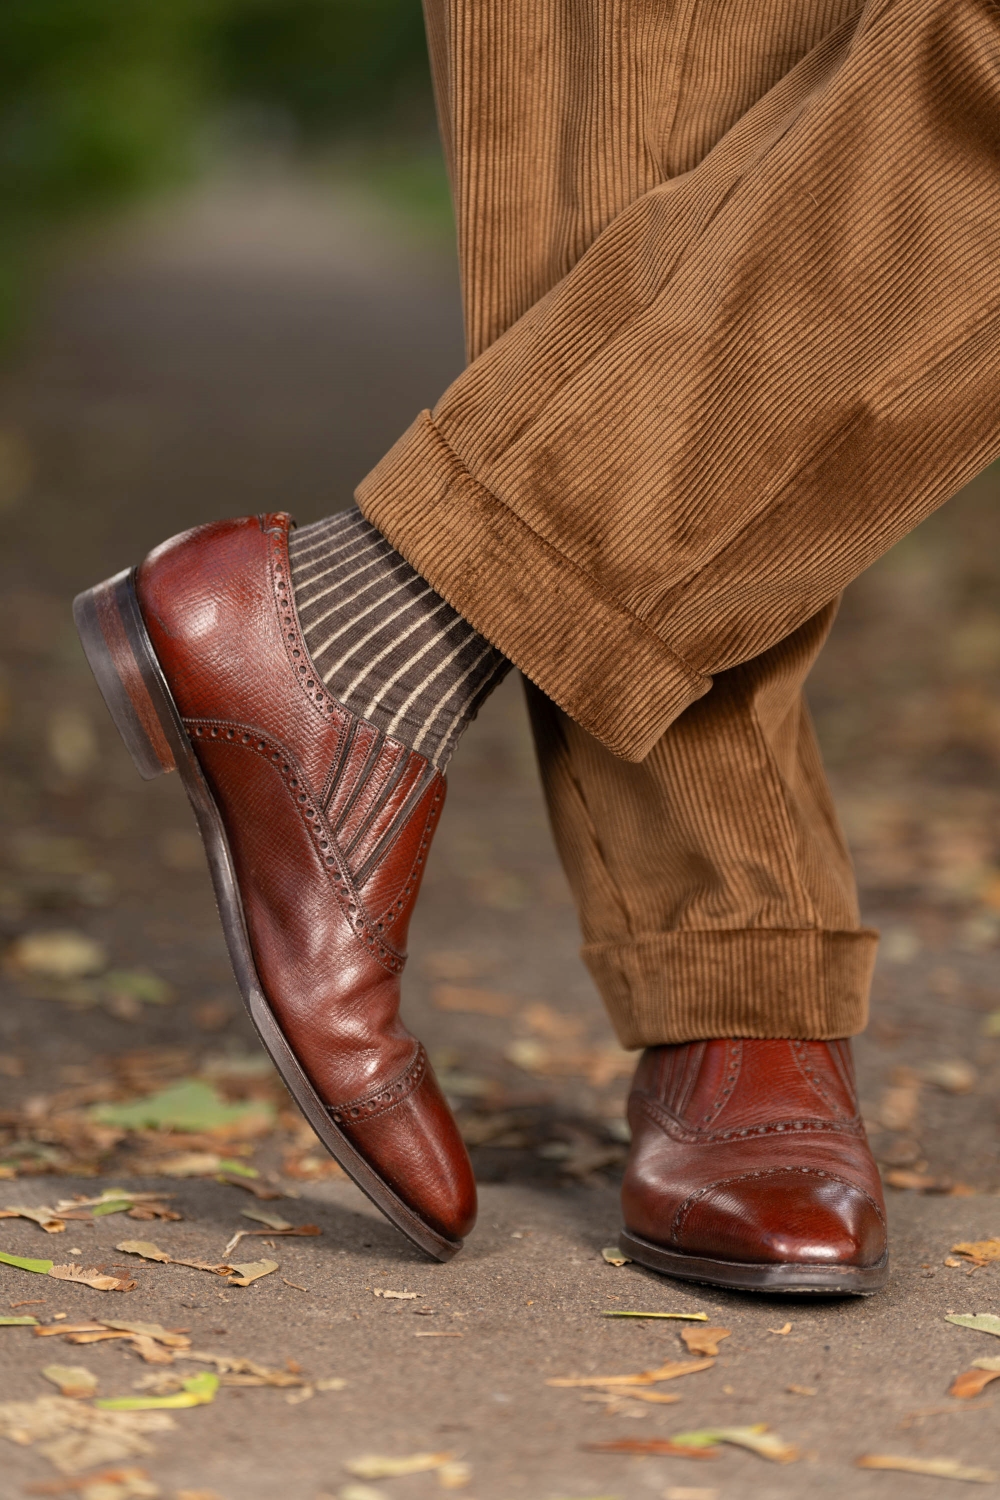 Cognac Corduroy Trouser, striped socks and burgundy oxford shoes